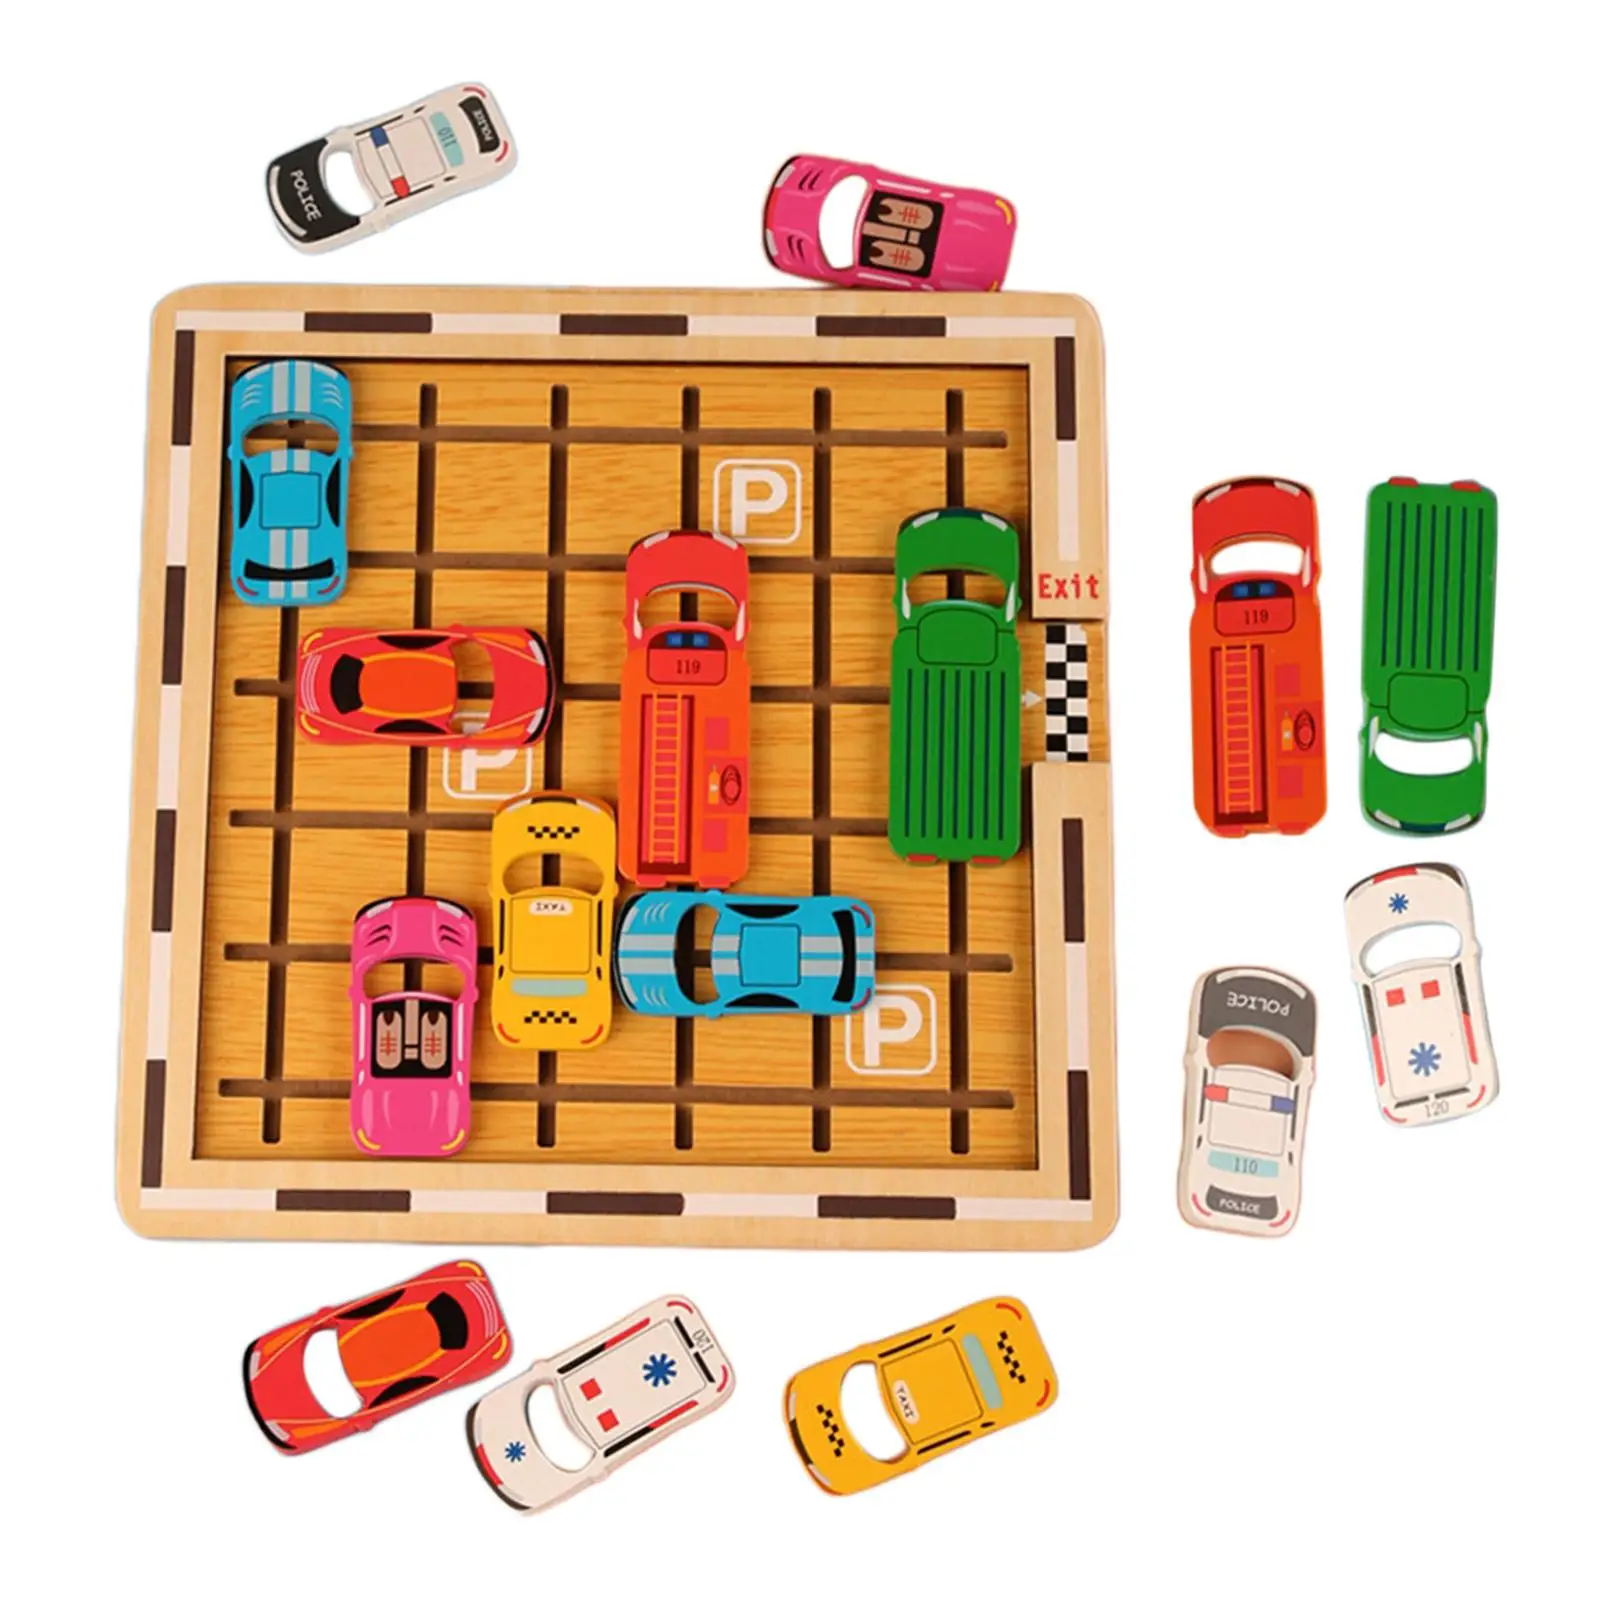 Wooden Early Education Car Development Educational Toys Logical Thinking Training Fine Motor Skills for Toddlers Kids Boys Gifts